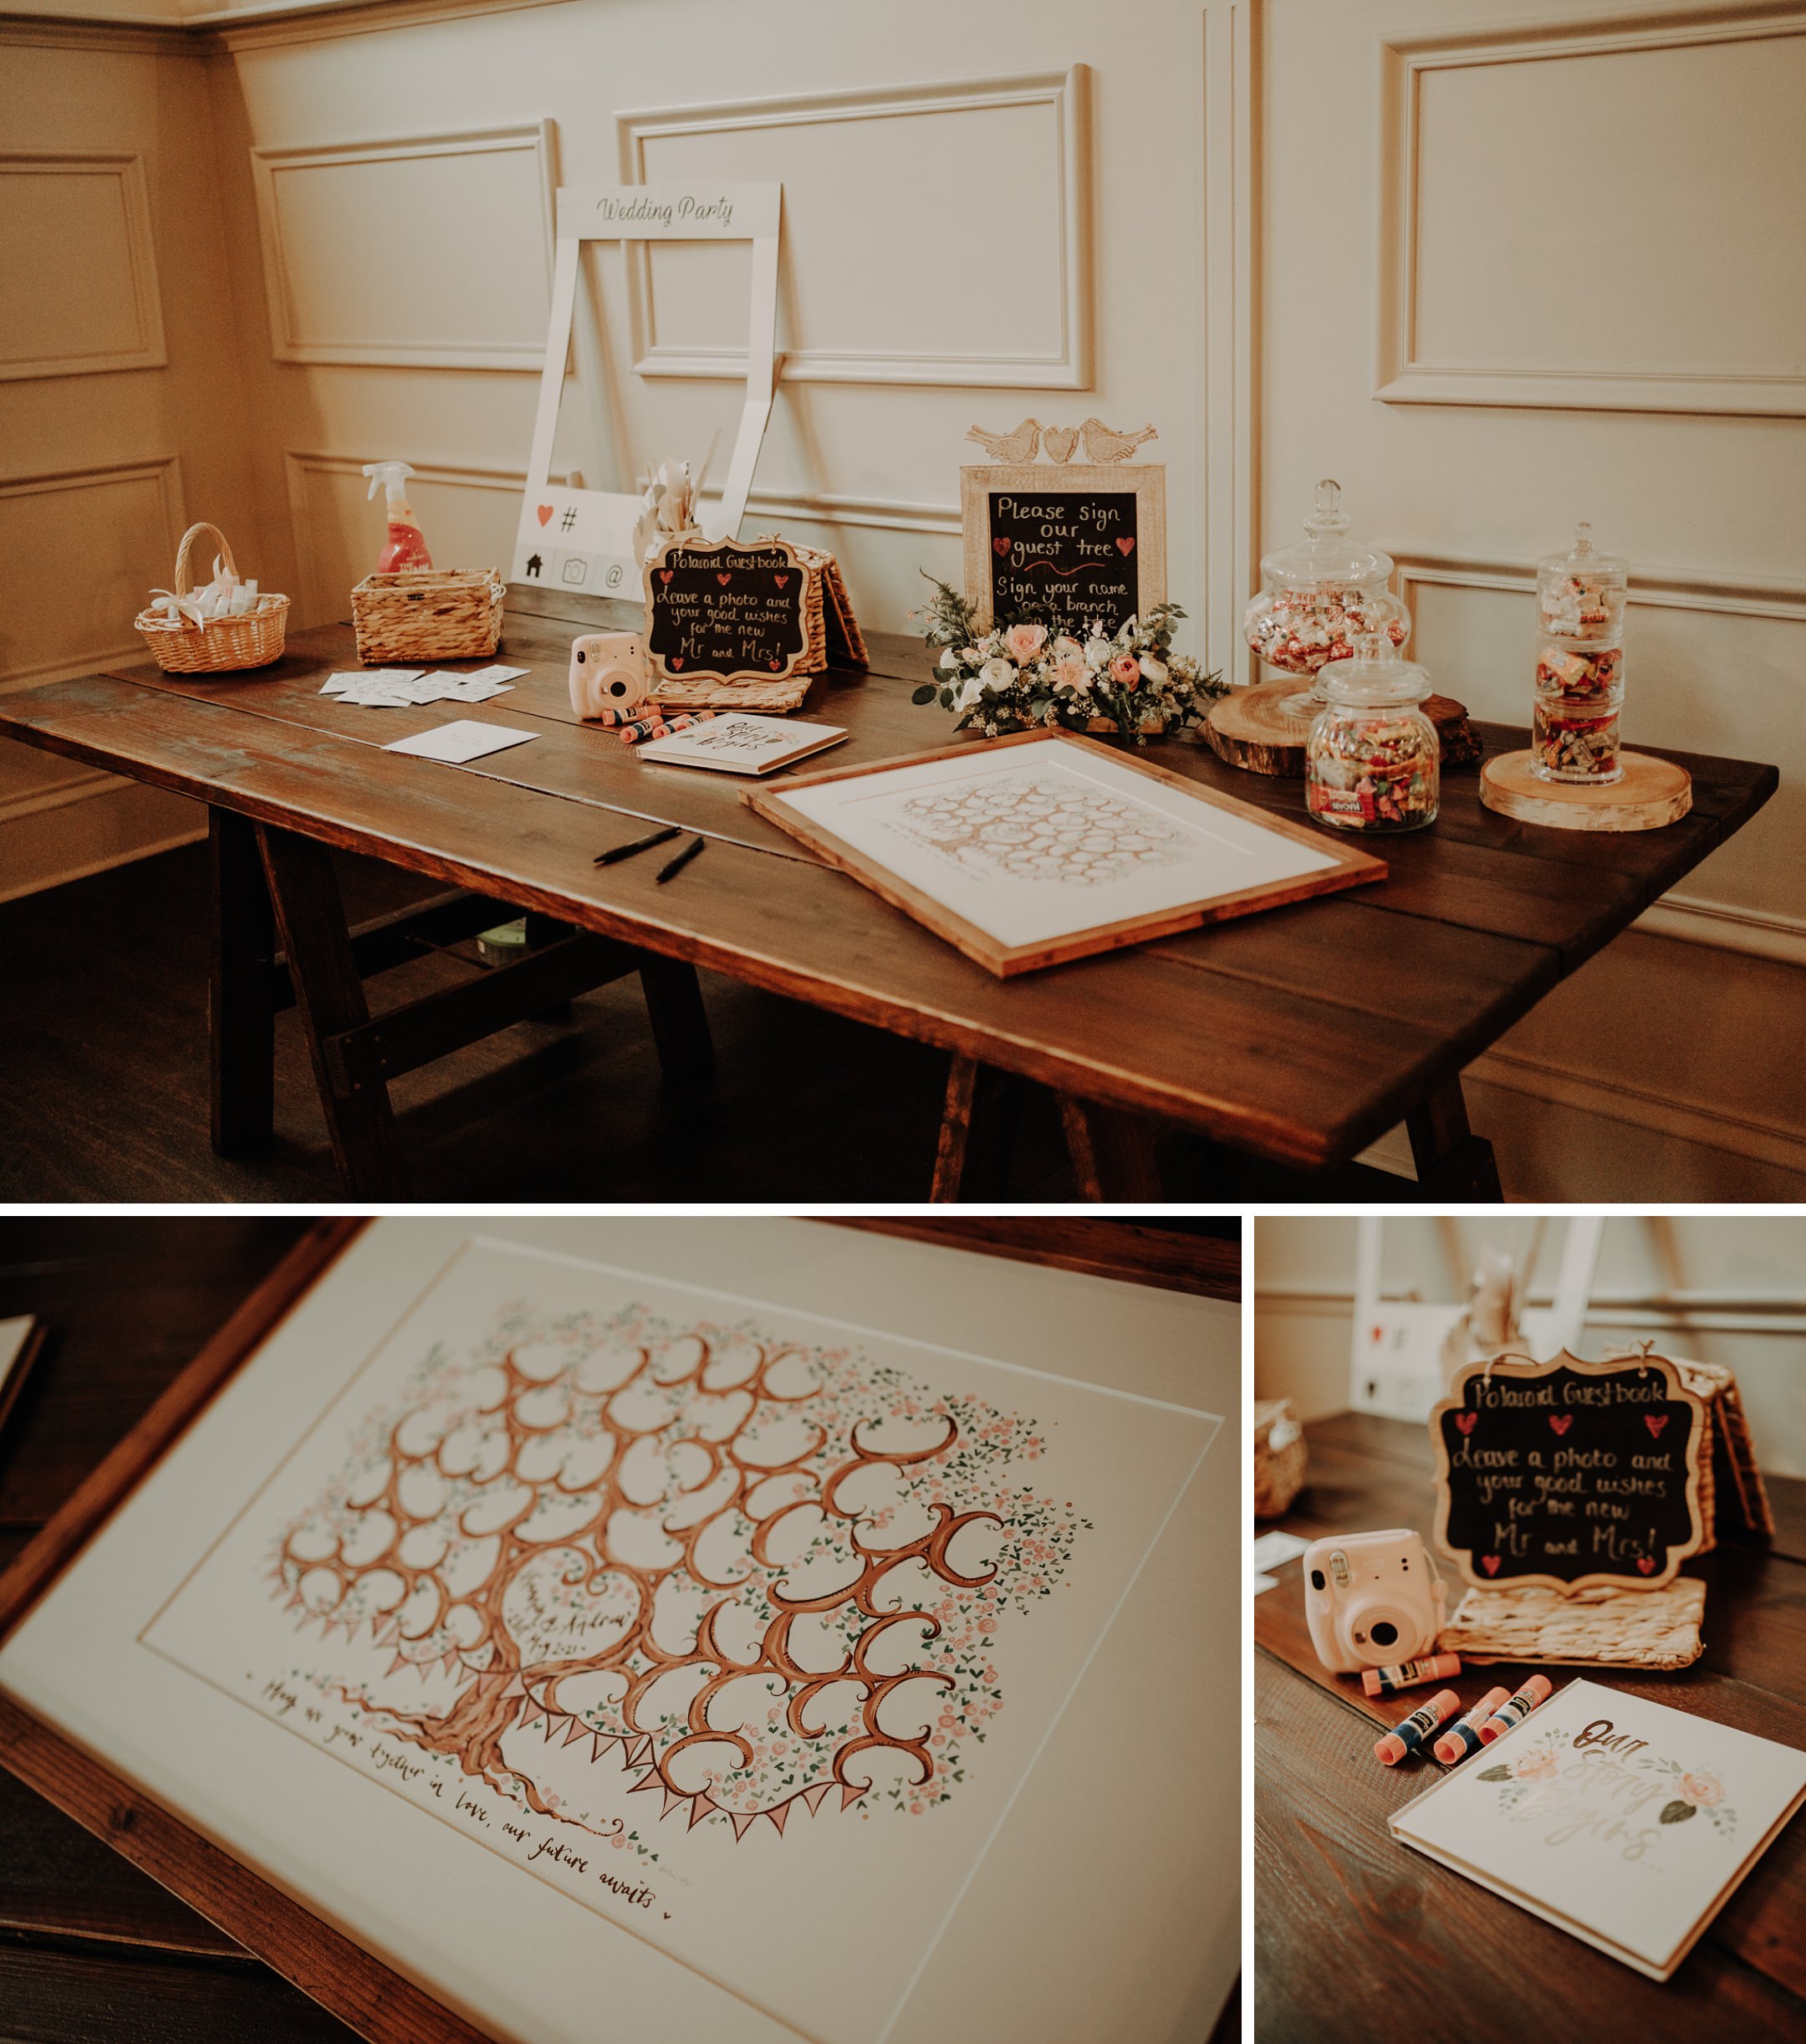 netherdale house wedding venue aberdeenshire interior guest book signing table setup ideas decorations